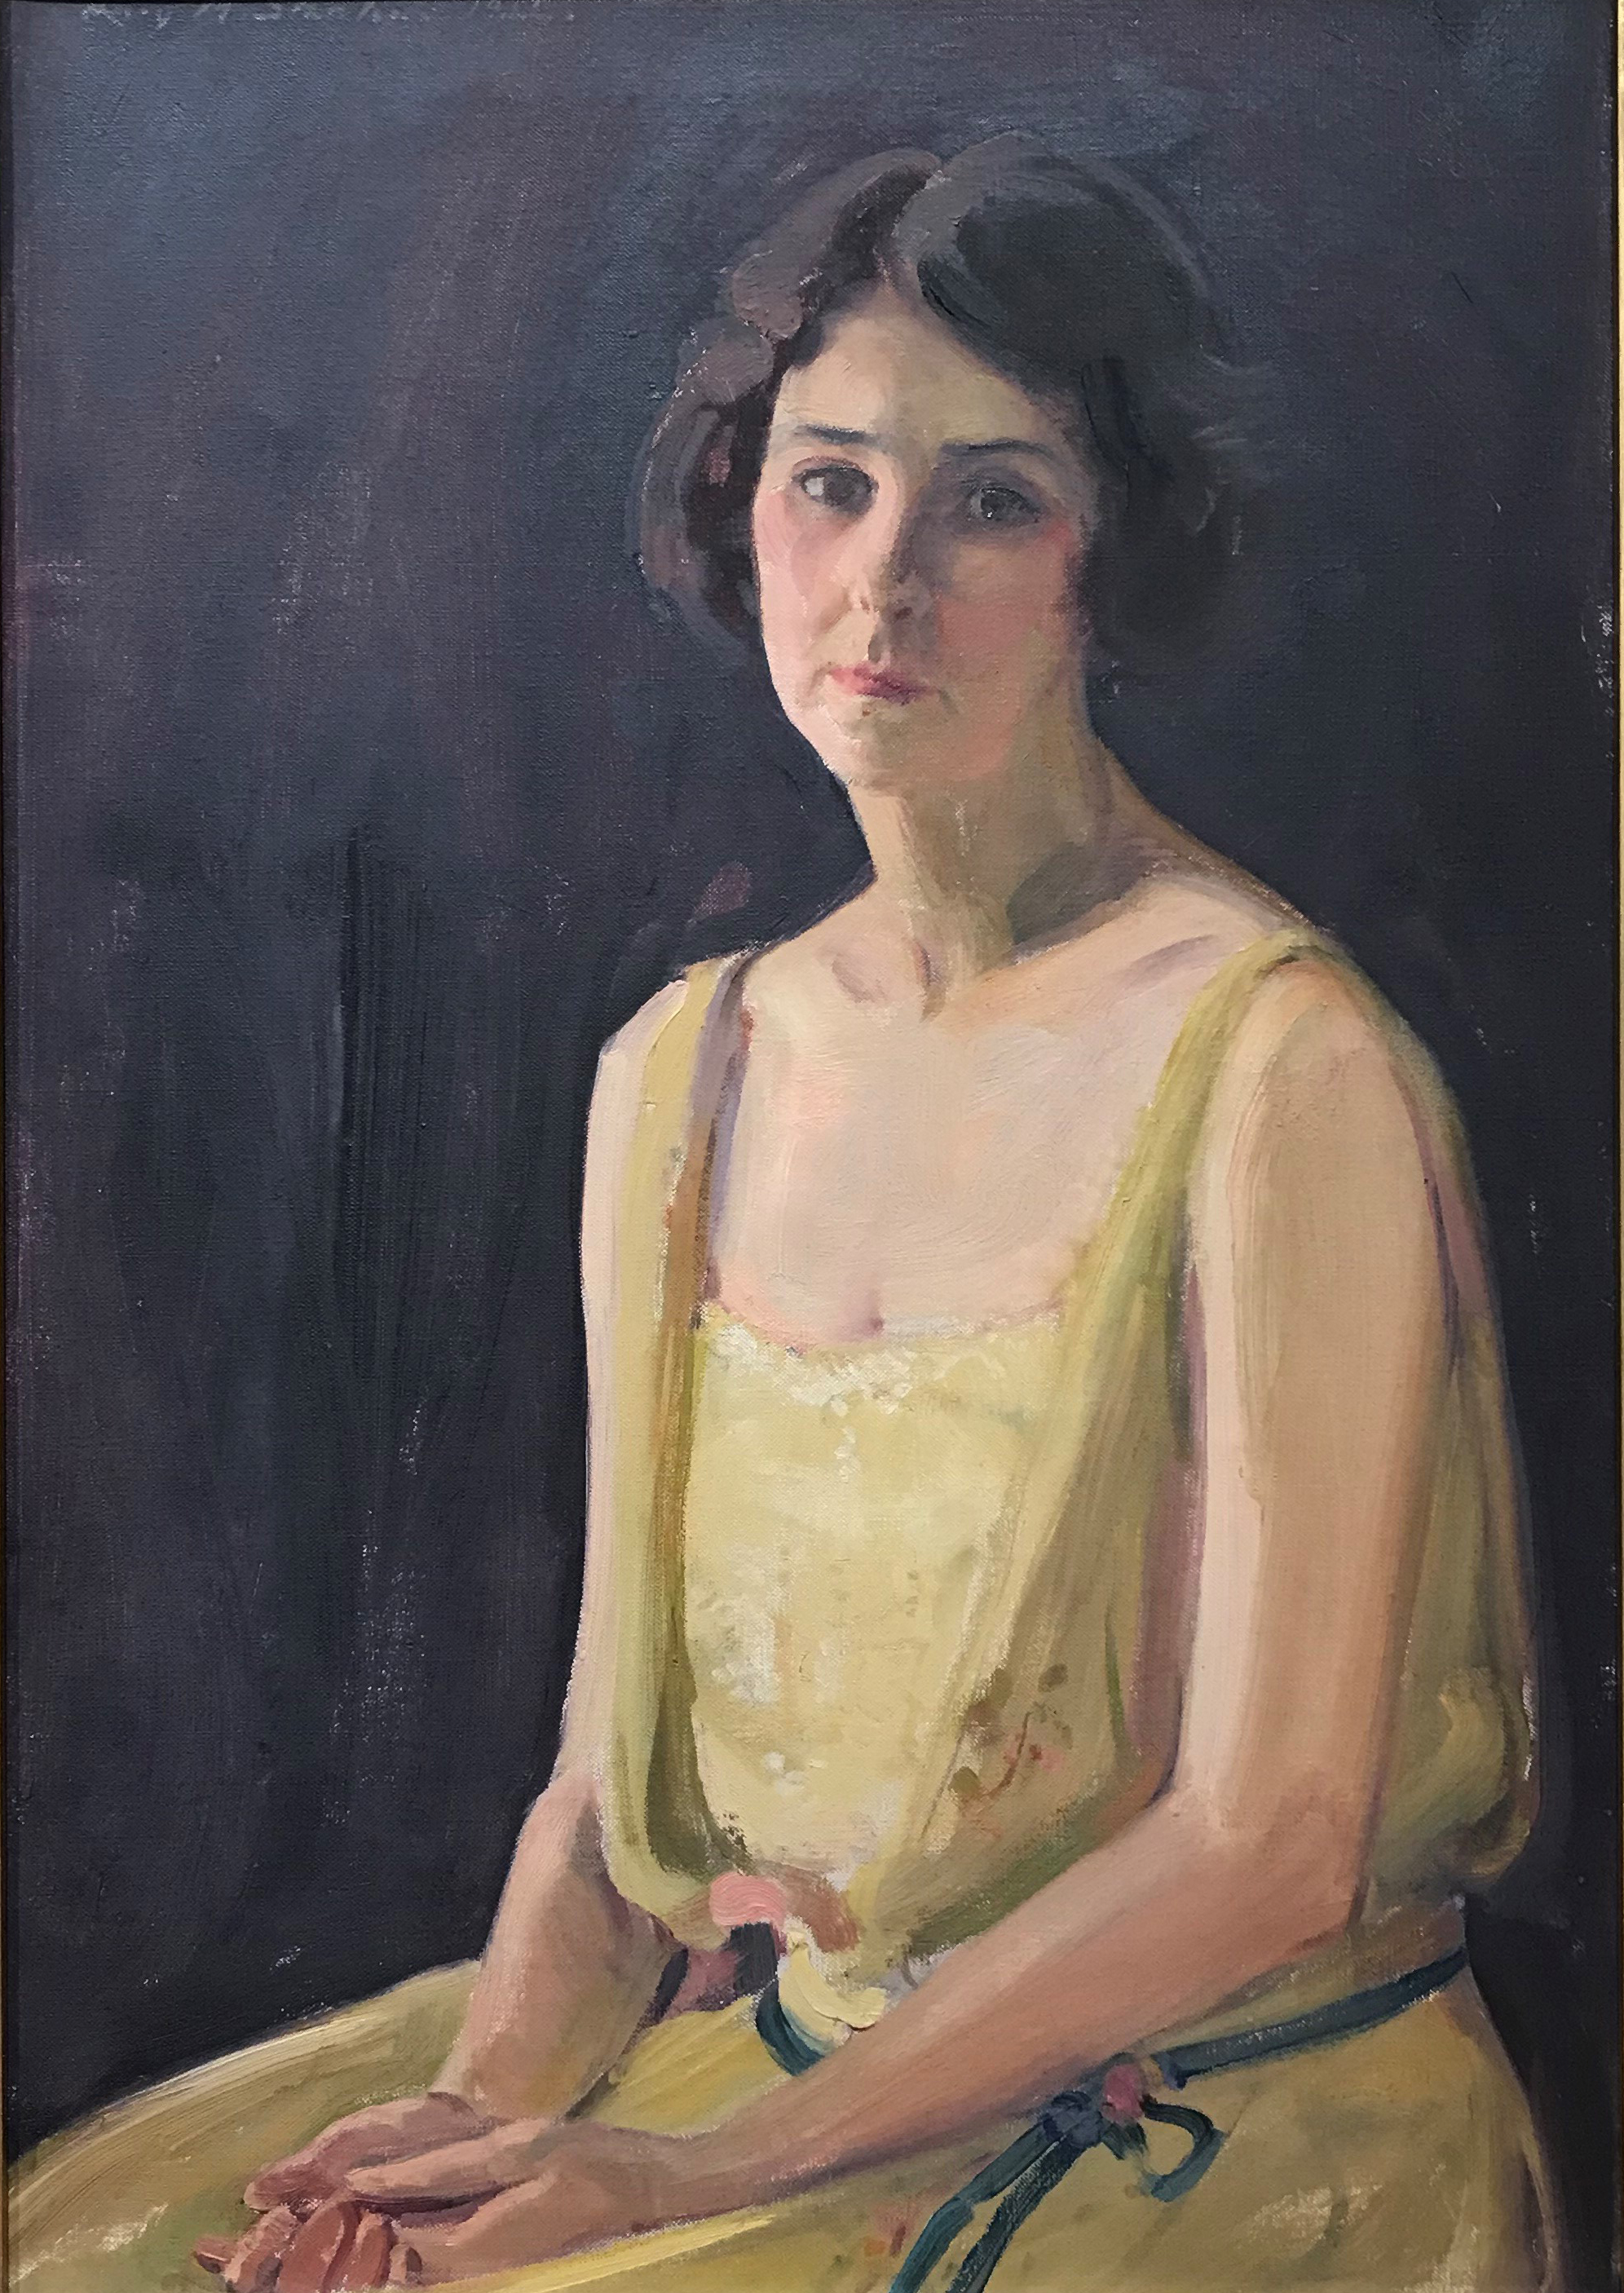 Elizabeth Peyton Stanton by Lucy May Stanton - 1922 - 64,8 x 44,8 cm 